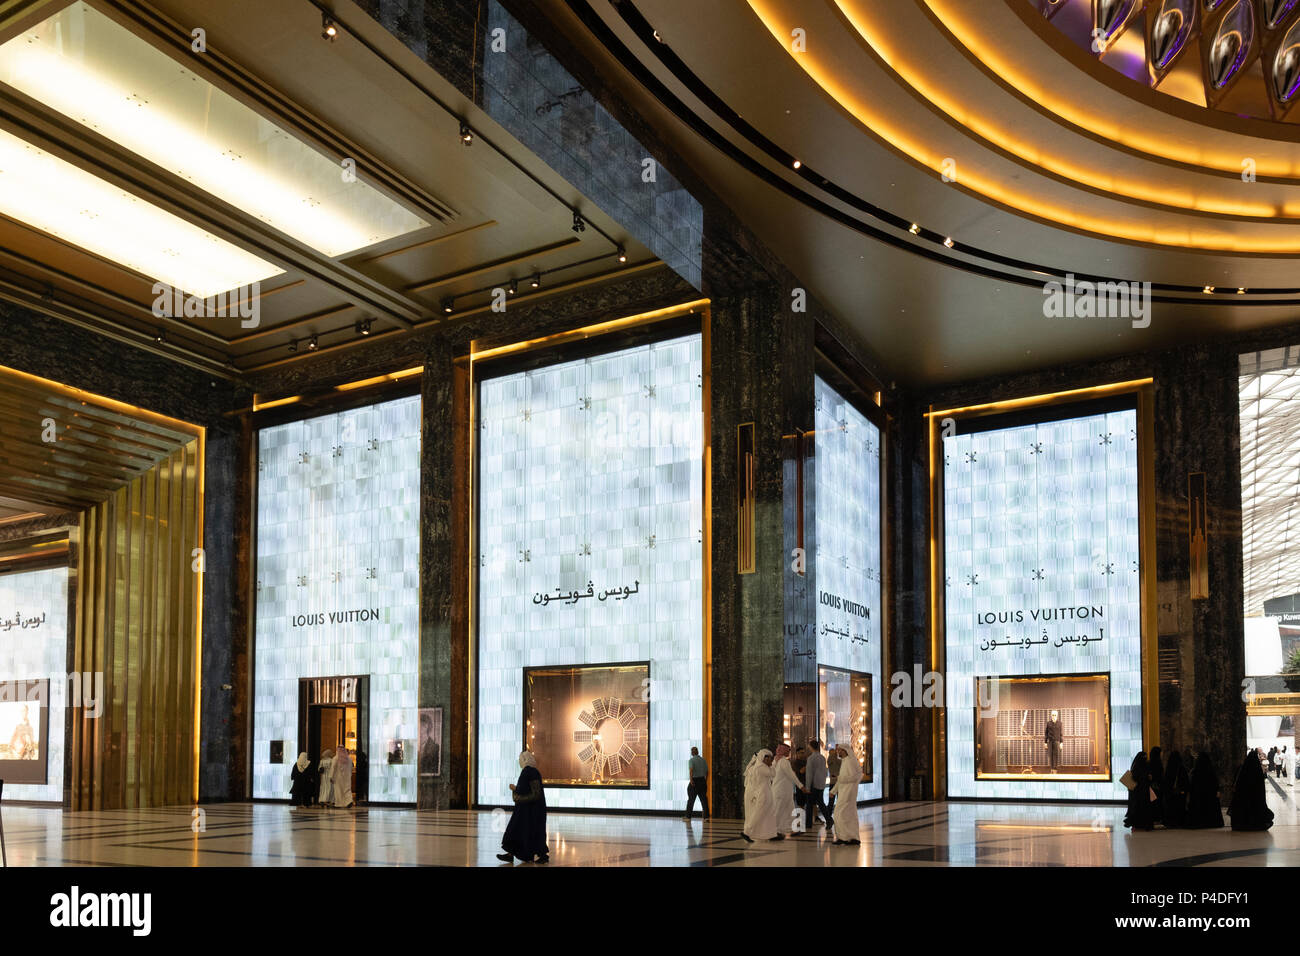 View of luxury boutiques in the Prestige mall inside The Avenues shopping  mall in Kuwait City, Kuwait Stock Photo - Alamy